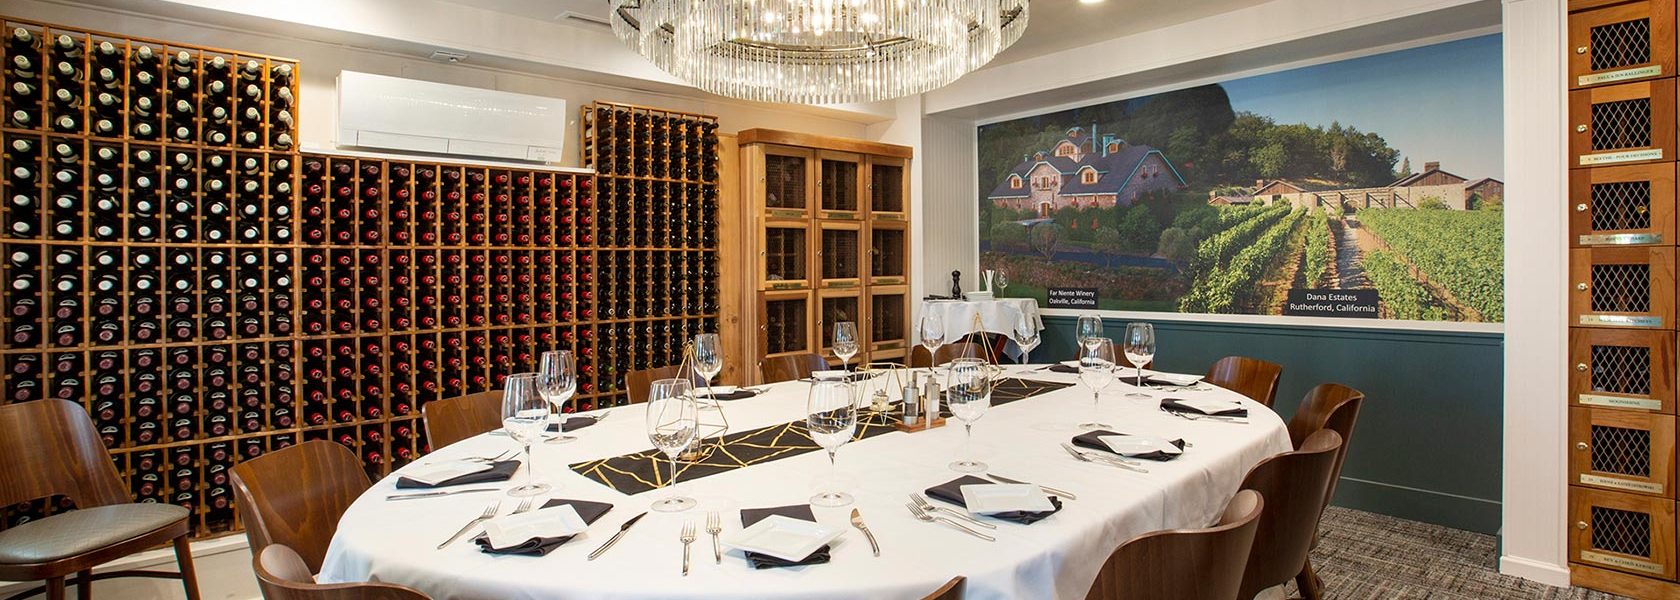 Private dining room lined with wine racks and wine lockers, table set for service for 12.